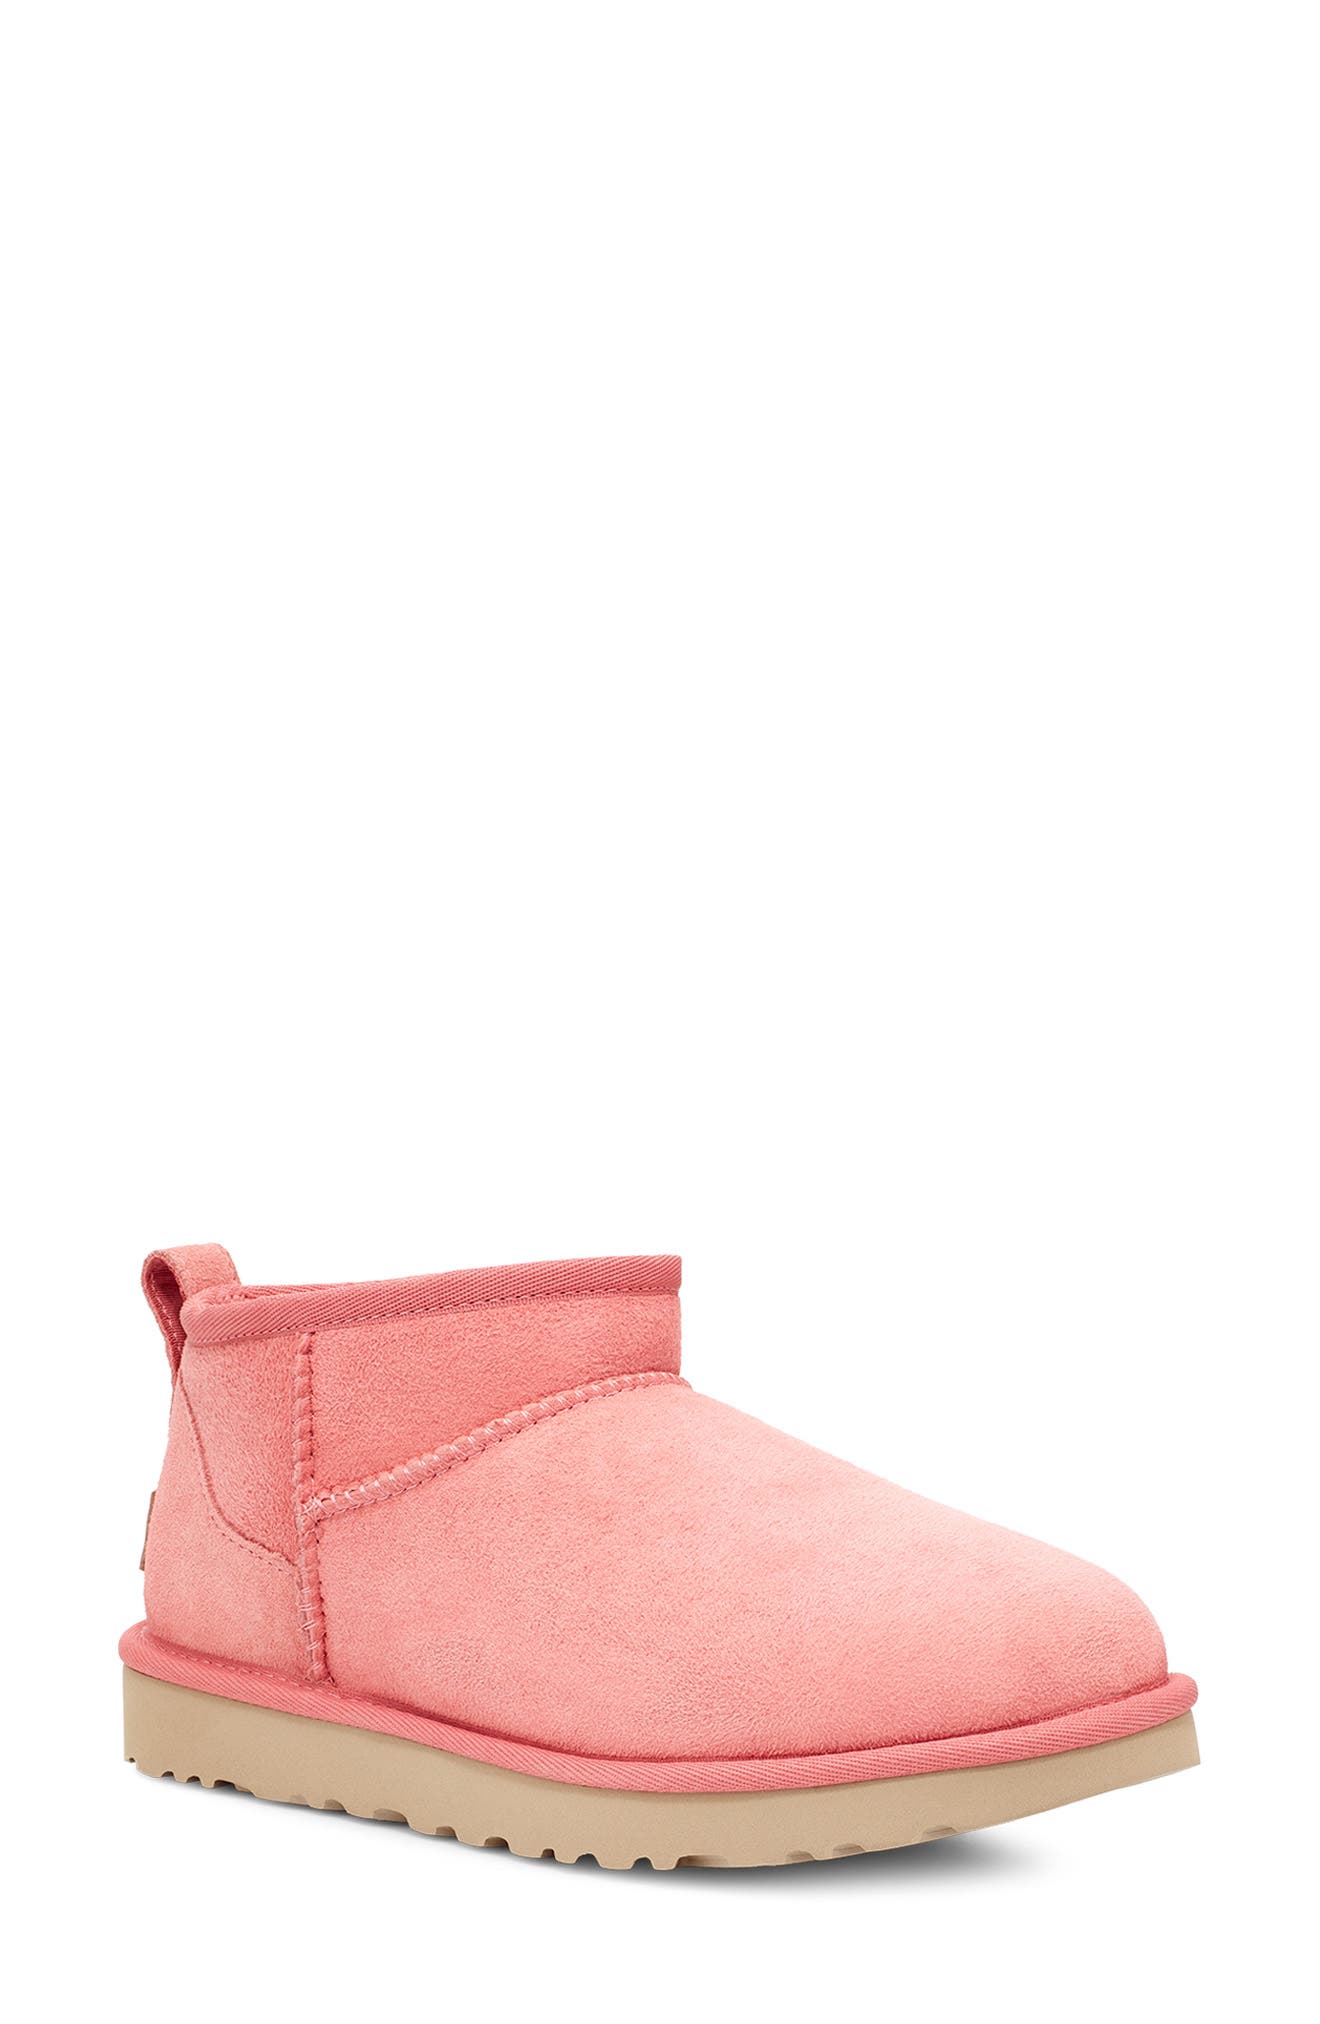 UGG(R) Ultra Mini Classic Boot in Pink Blossom